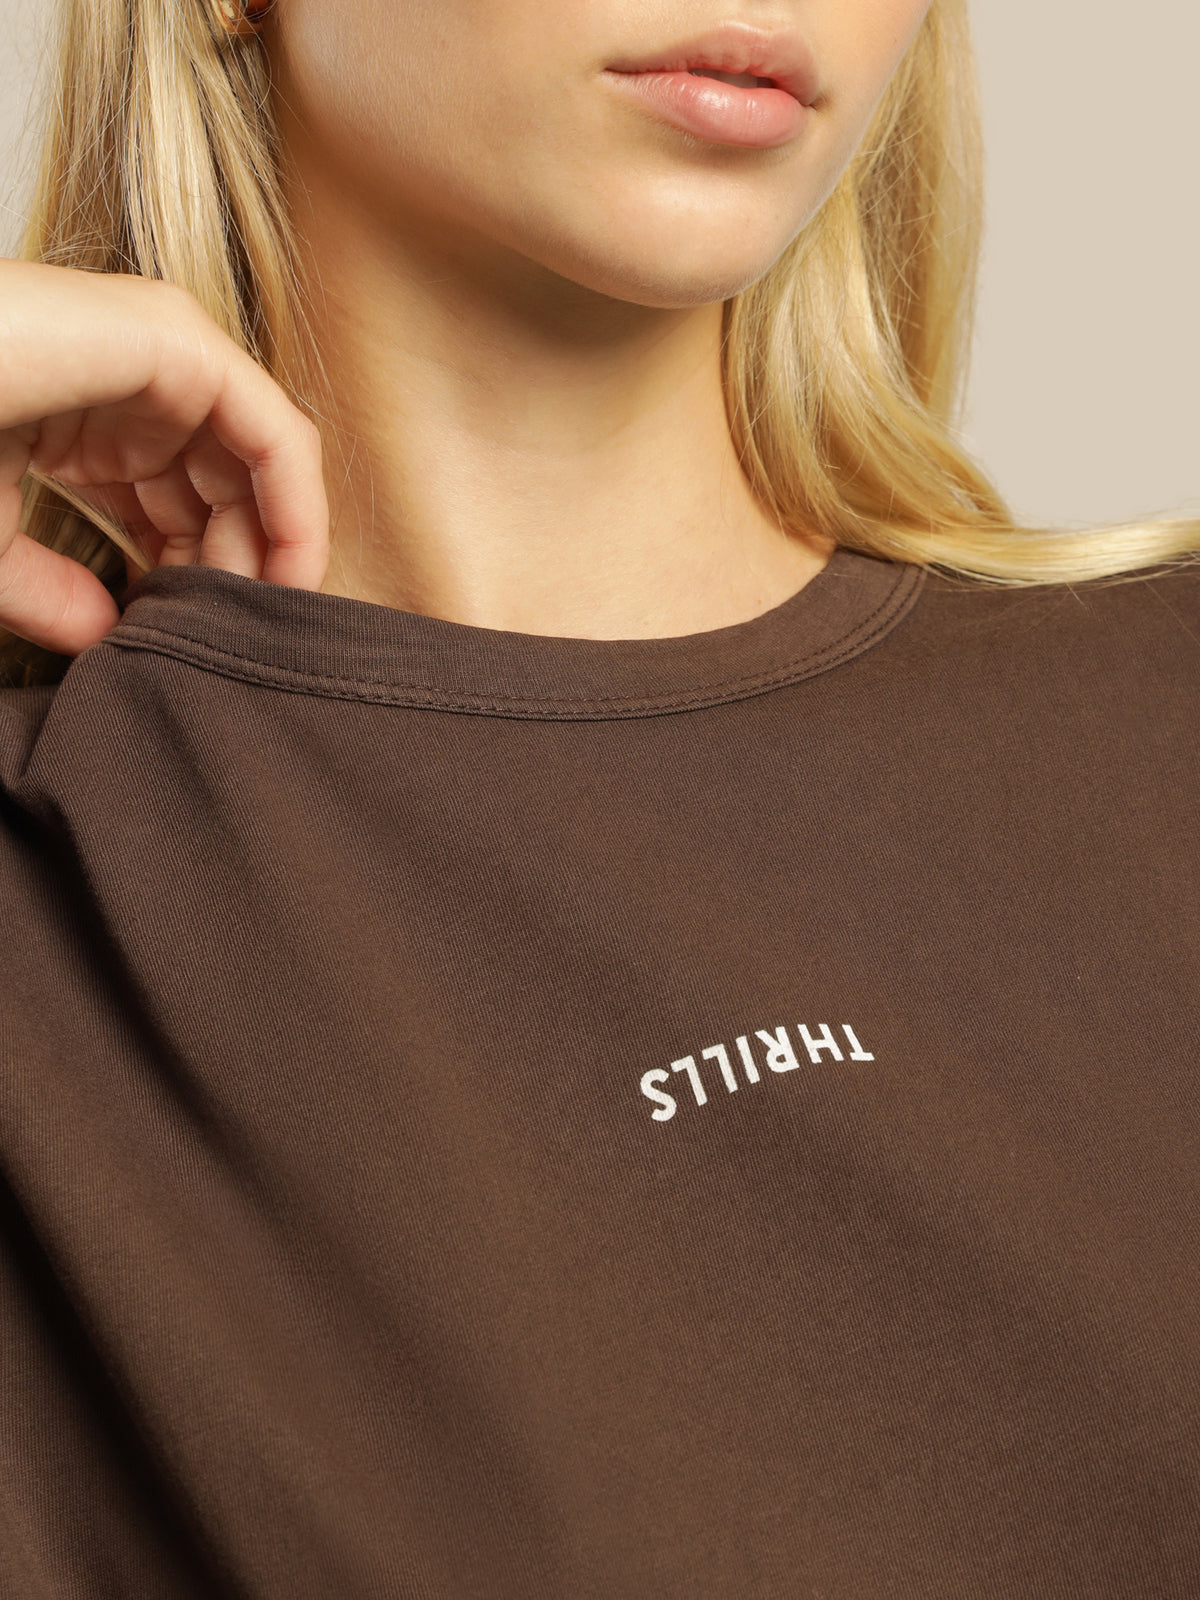 Minimal Relaxed T-Shirt in Postal Brown